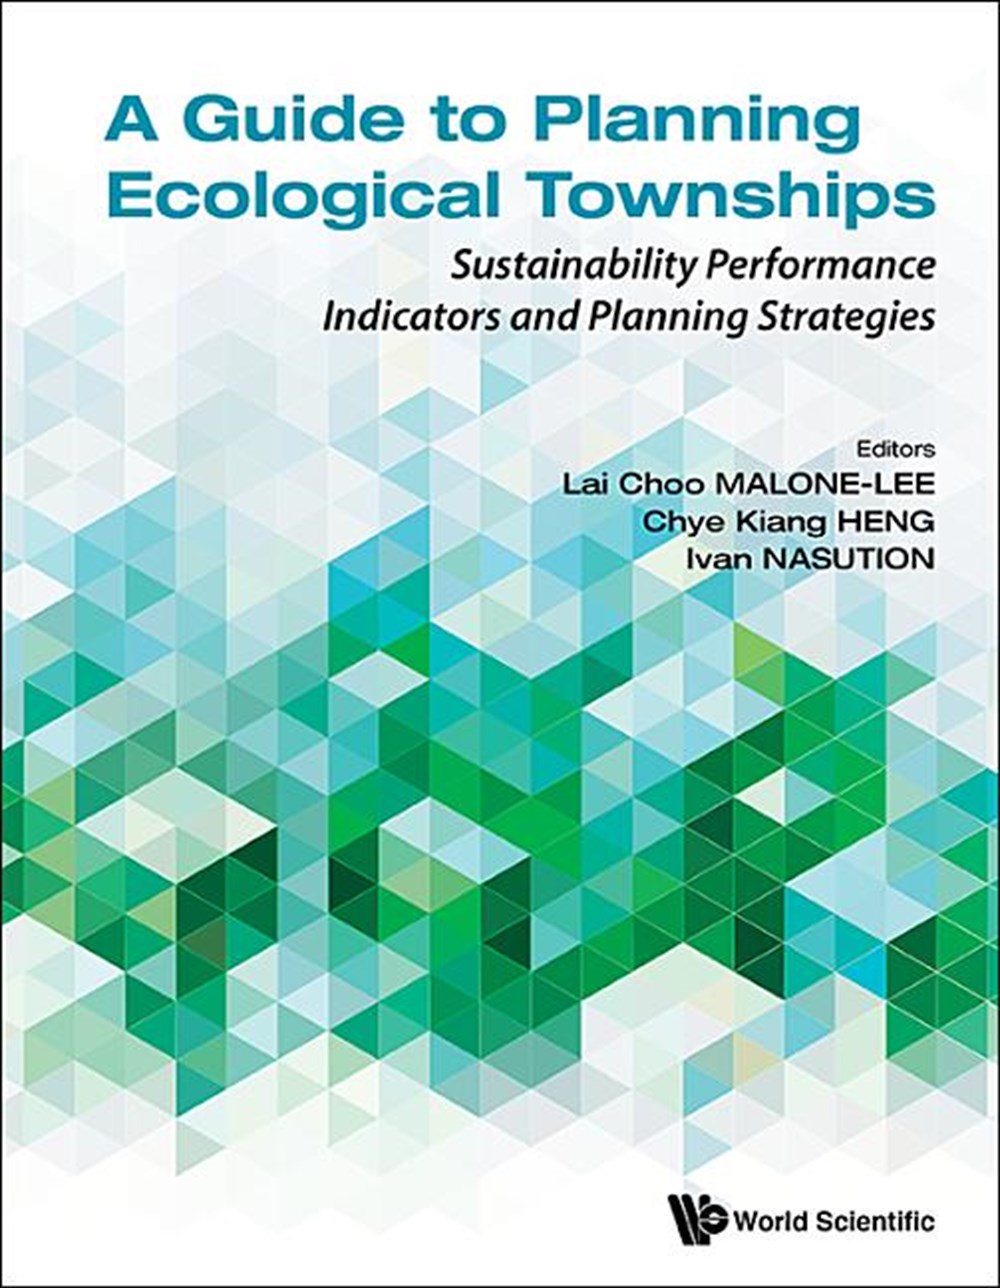 Guide to Planning Ecological Townships, A: Sustainability Performance Indicators and Planning Strate